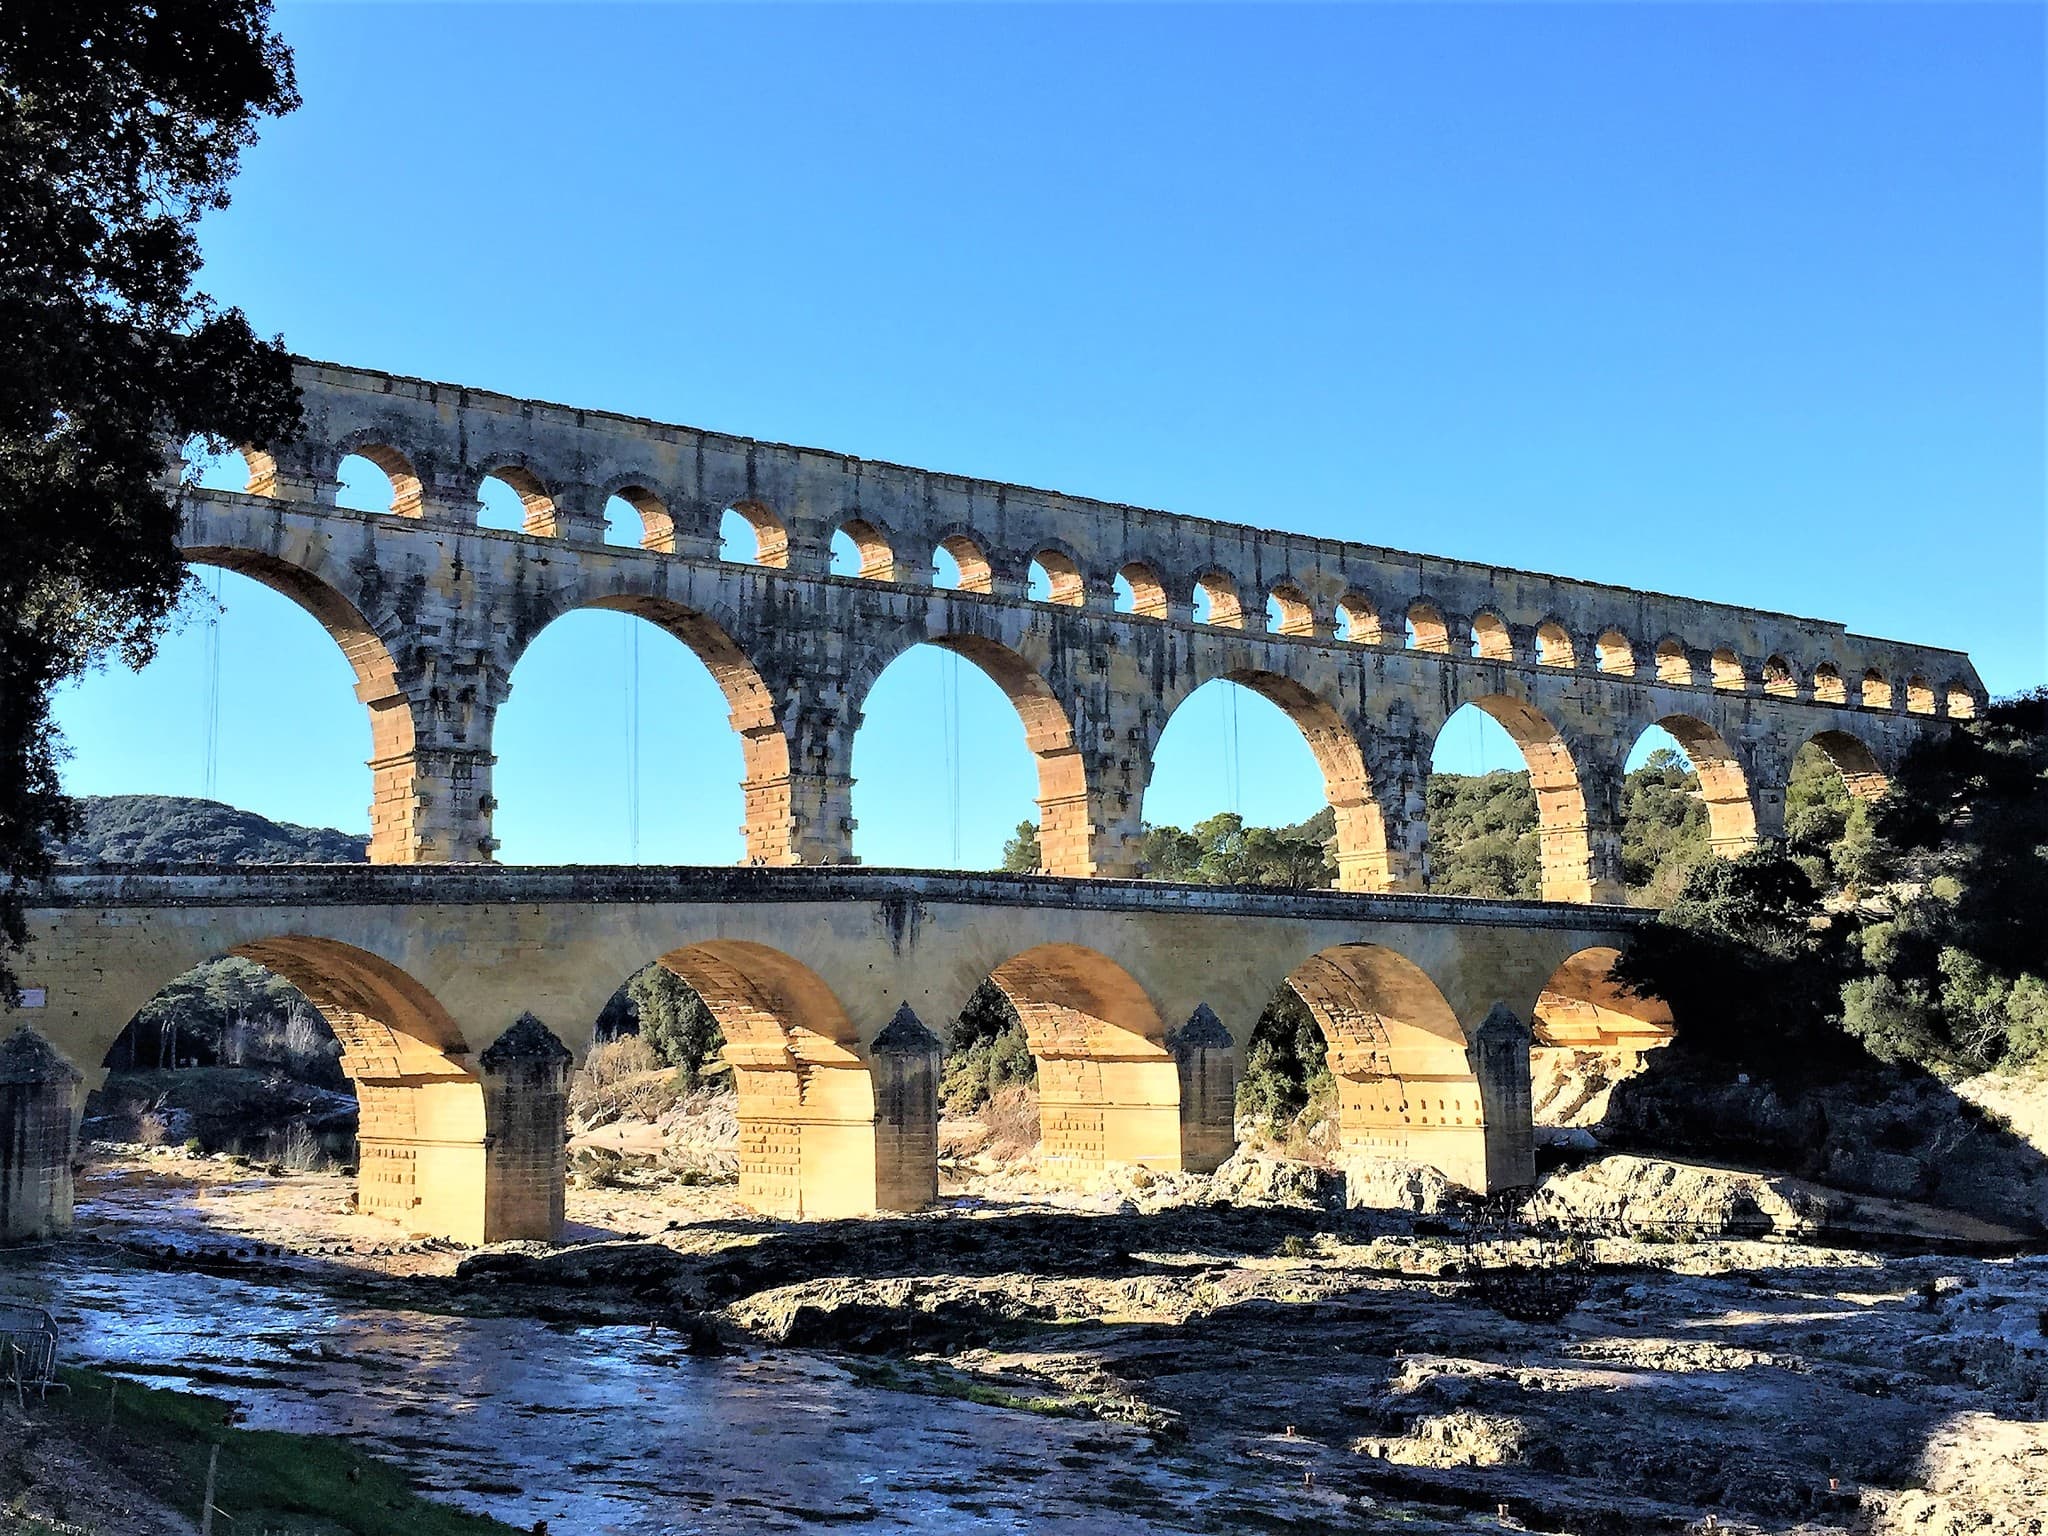 Photo of famous Roman aqueduct the Pont du Gard located in the Provence region of France.